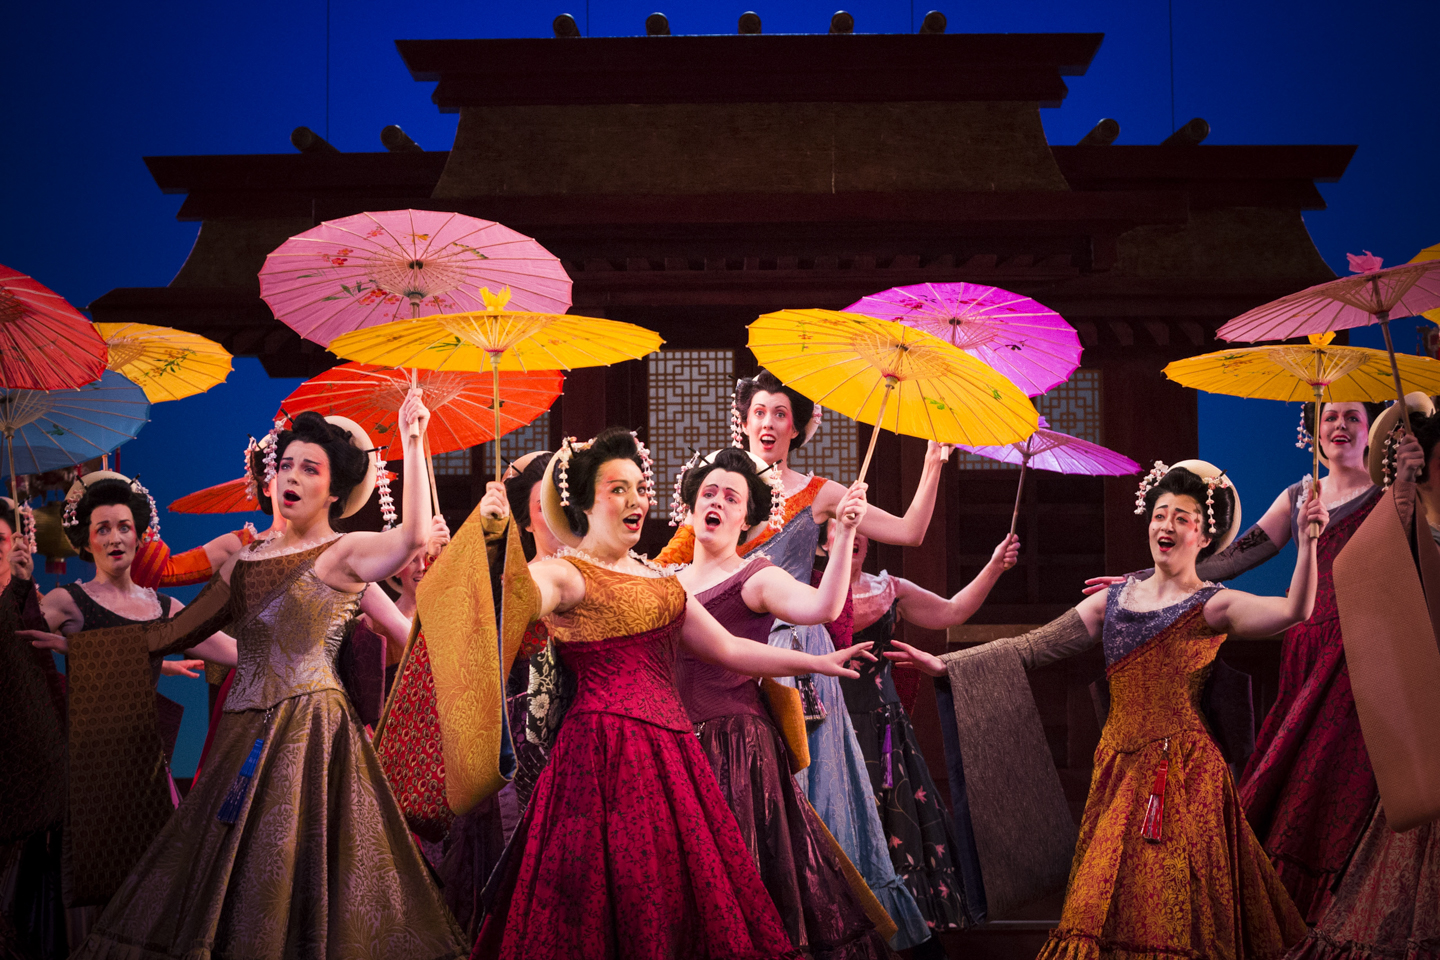 Females from the chorus of The Mikado brandishing colourful parasols